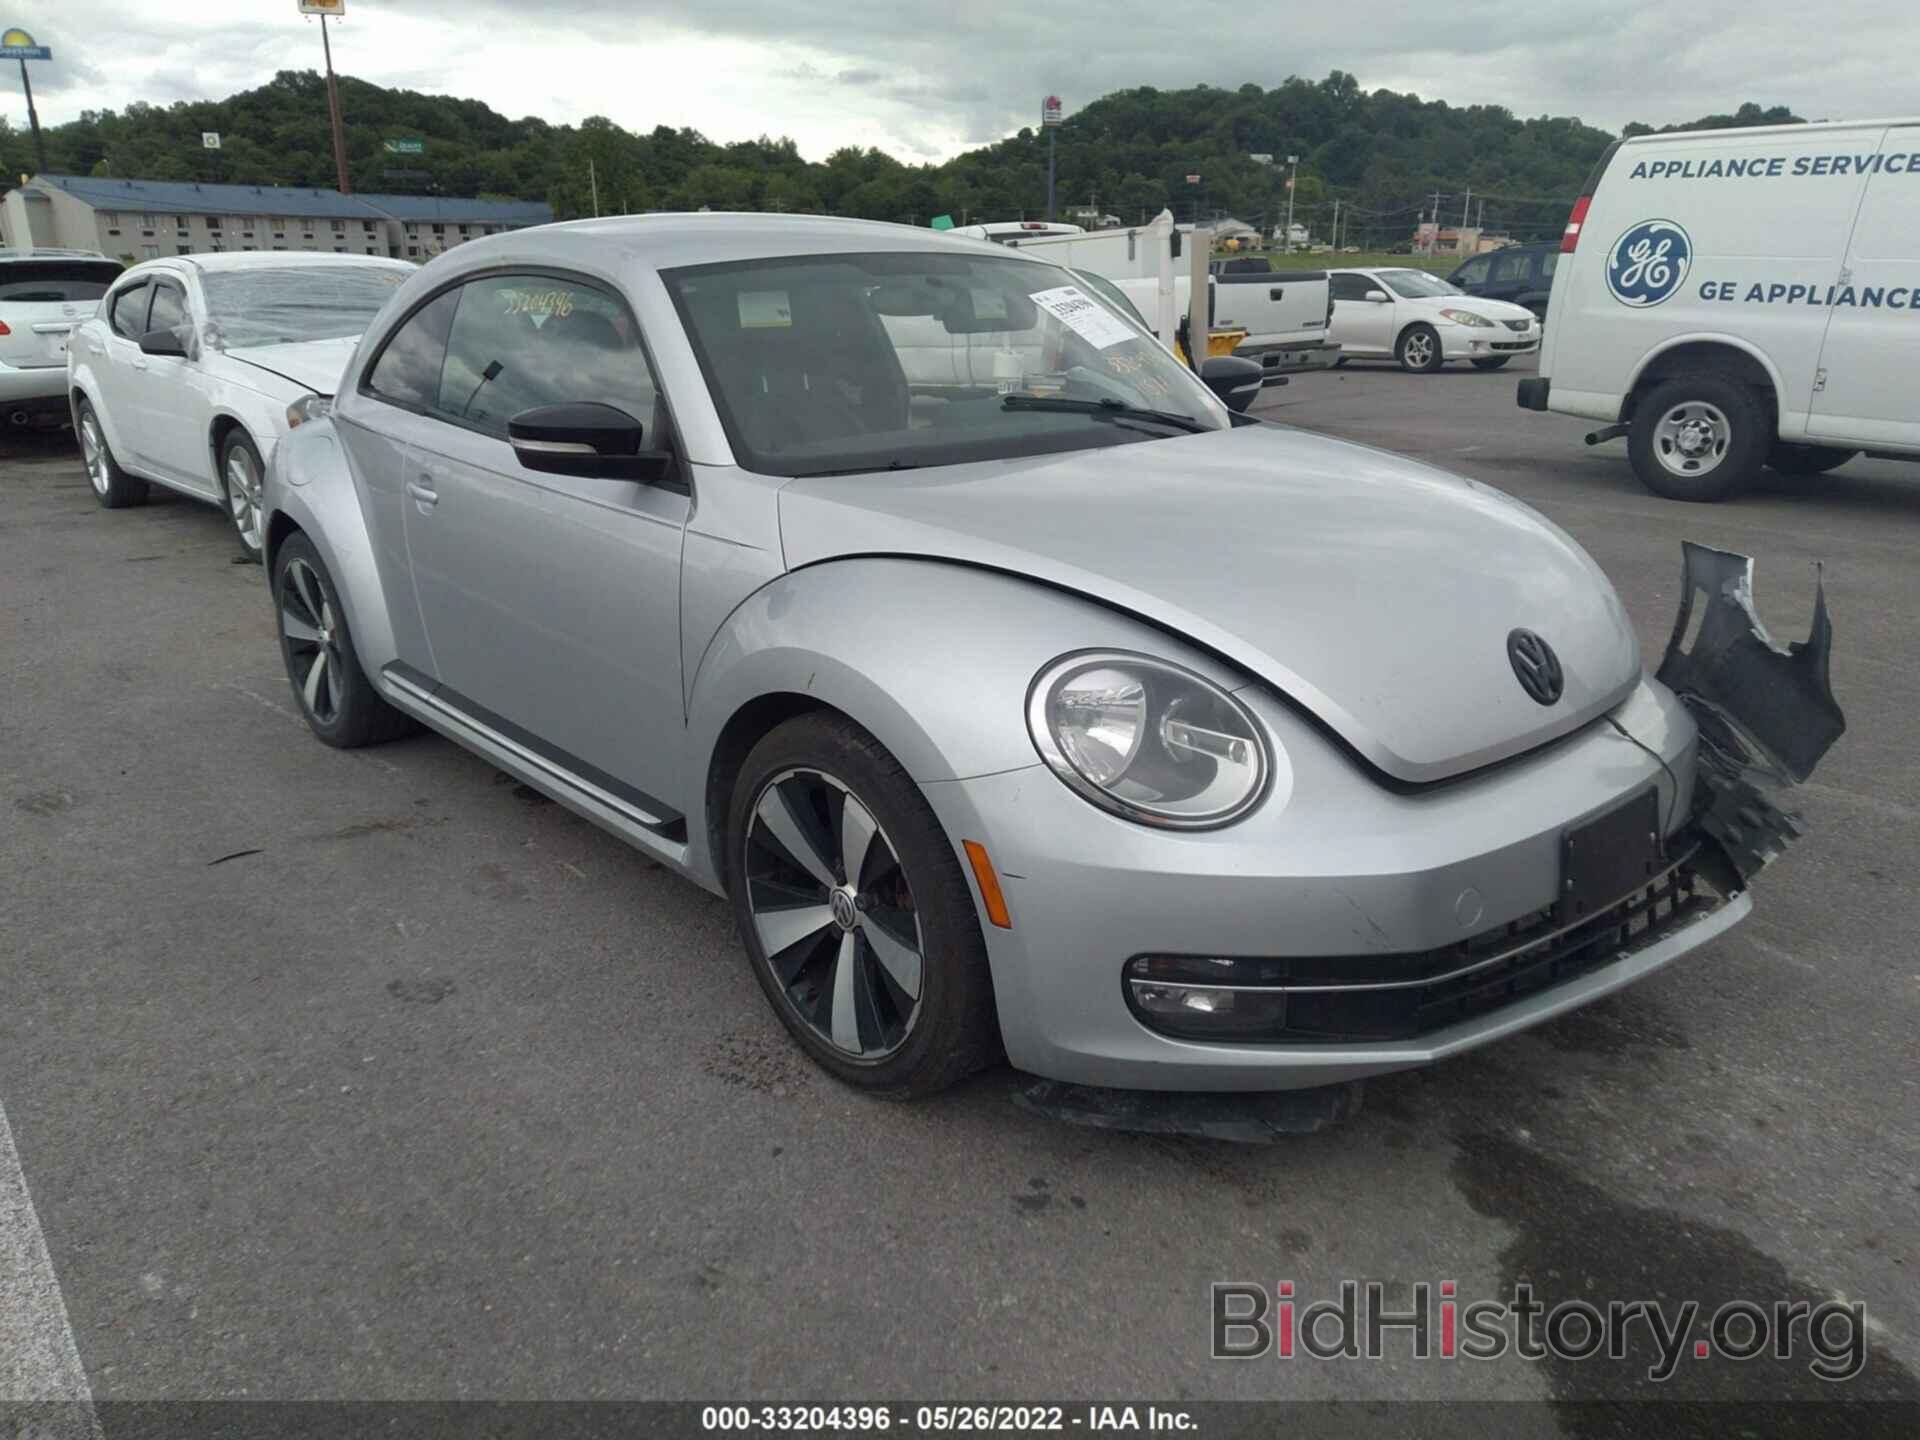 Photo 3VW4A7AT8DM654986 - VOLKSWAGEN BEETLE COUPE 2013